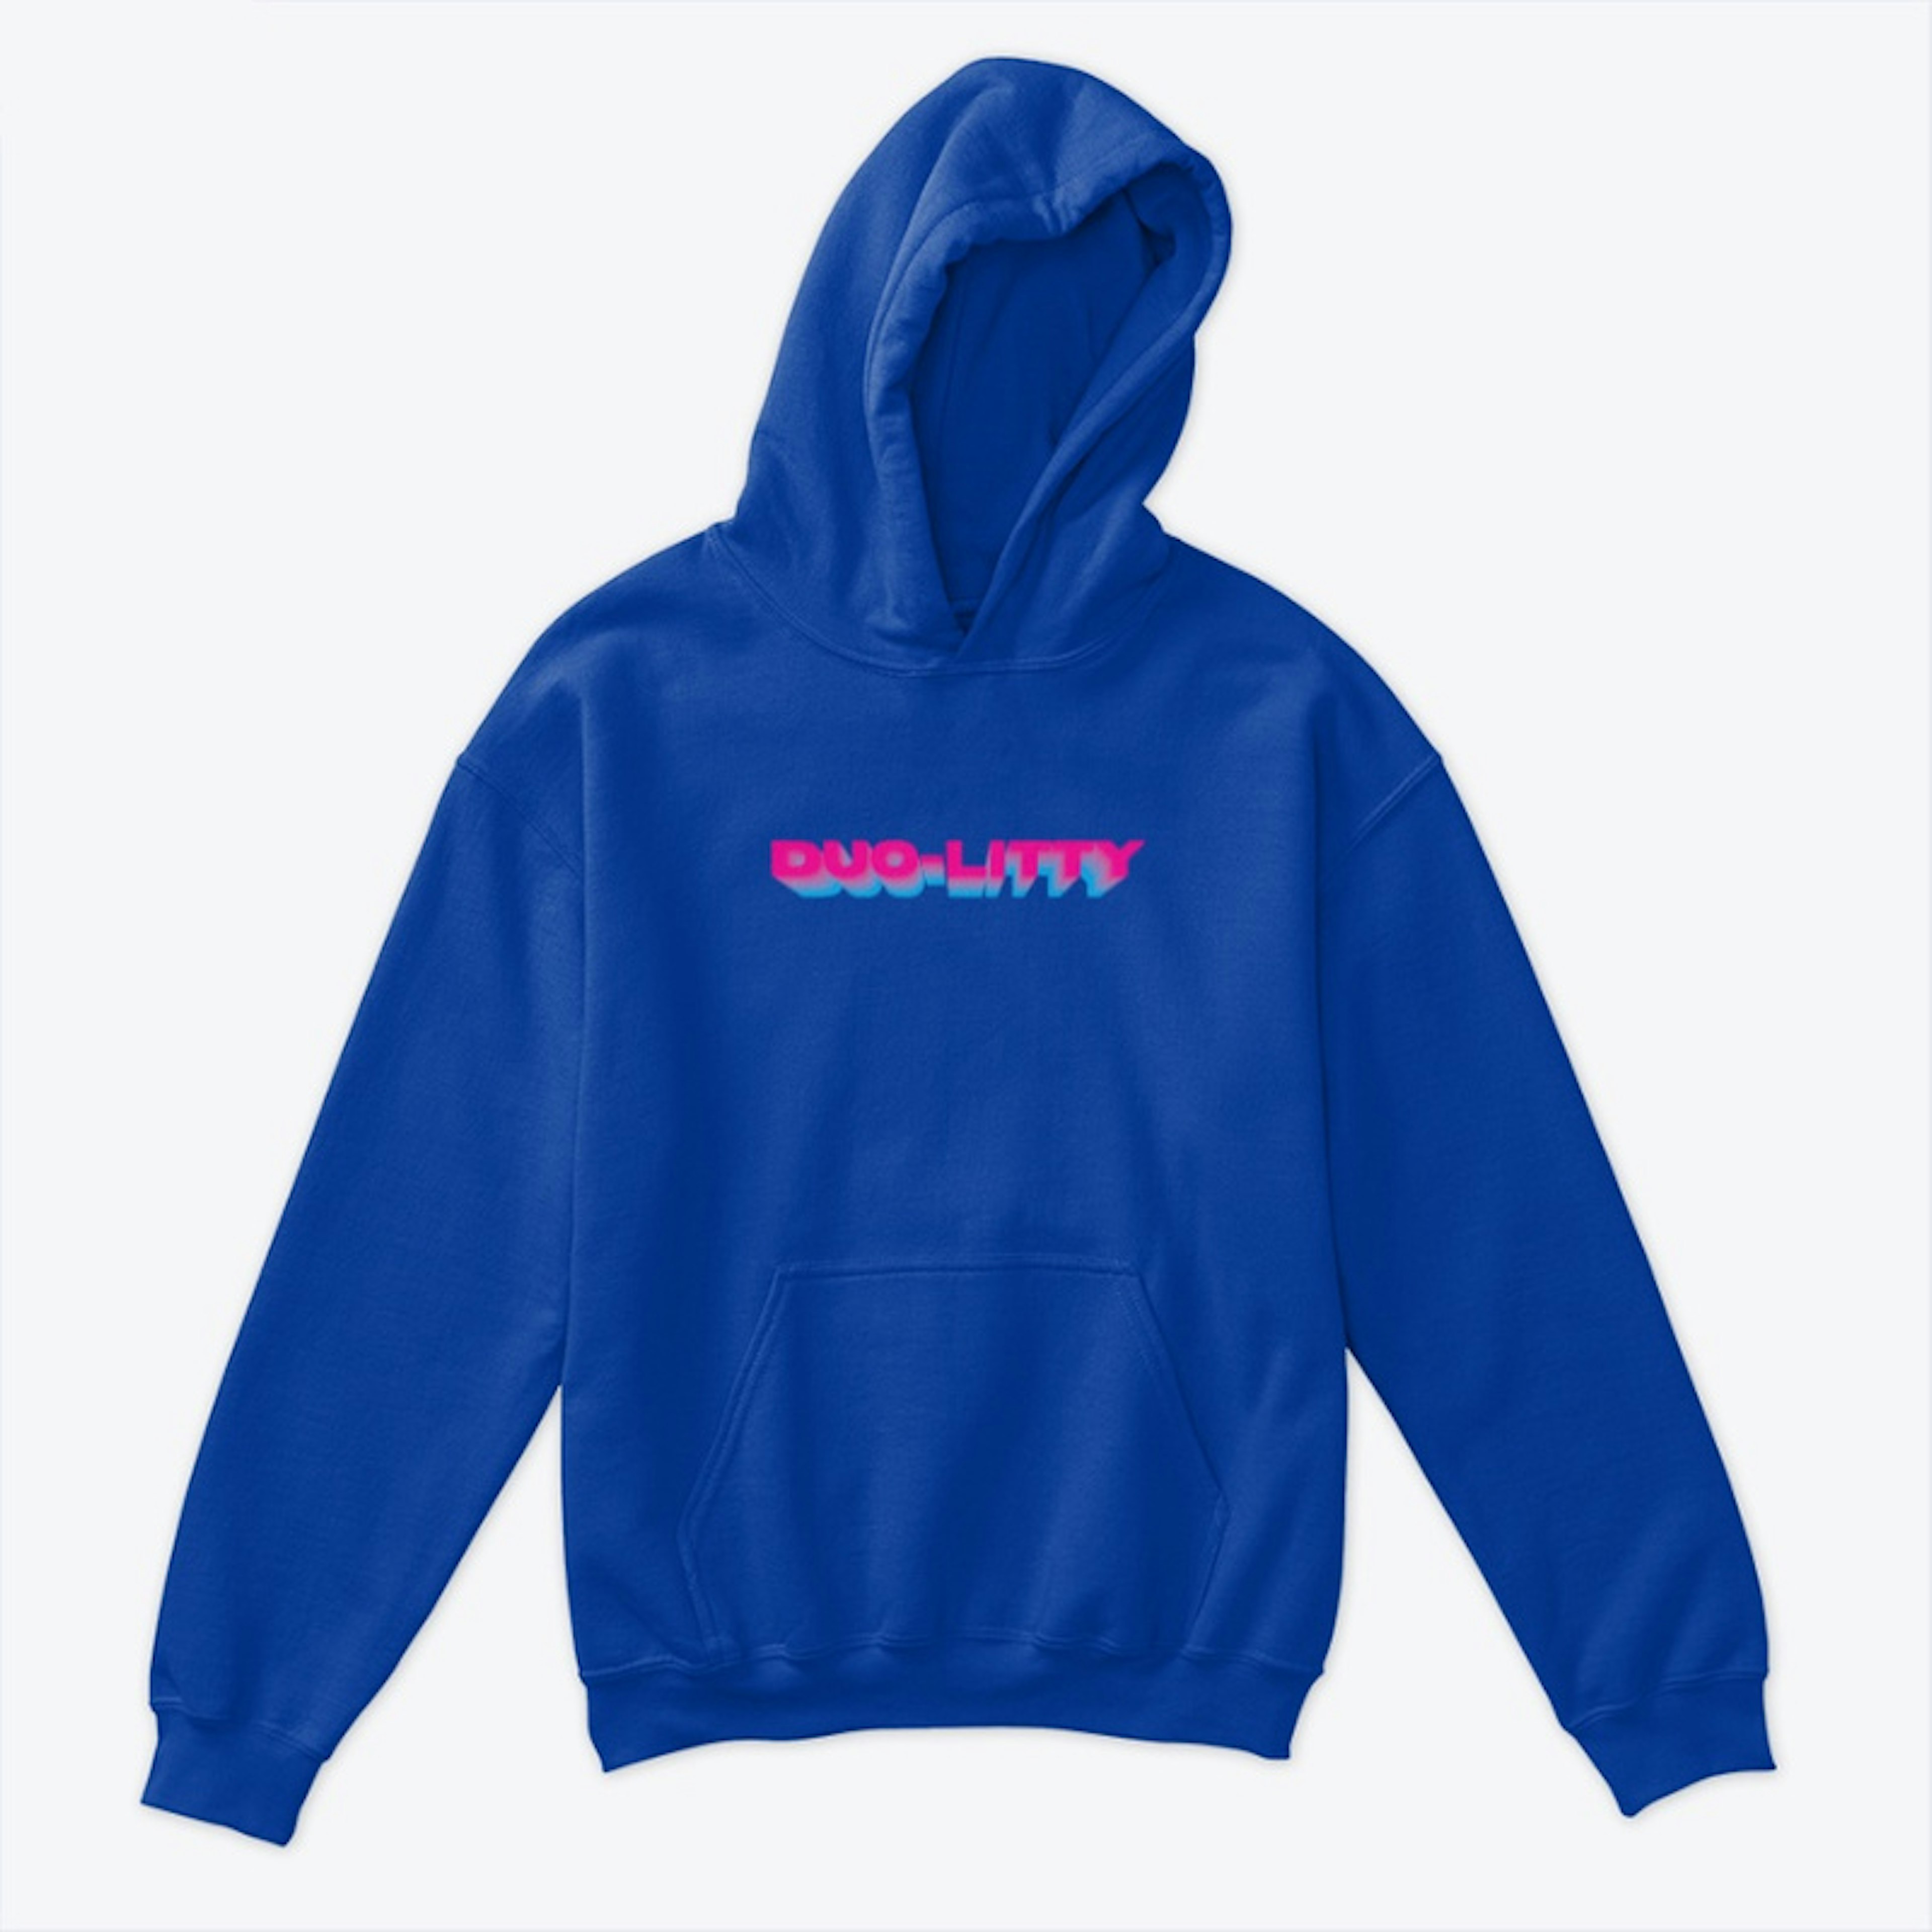 Duo-Litty Clothing